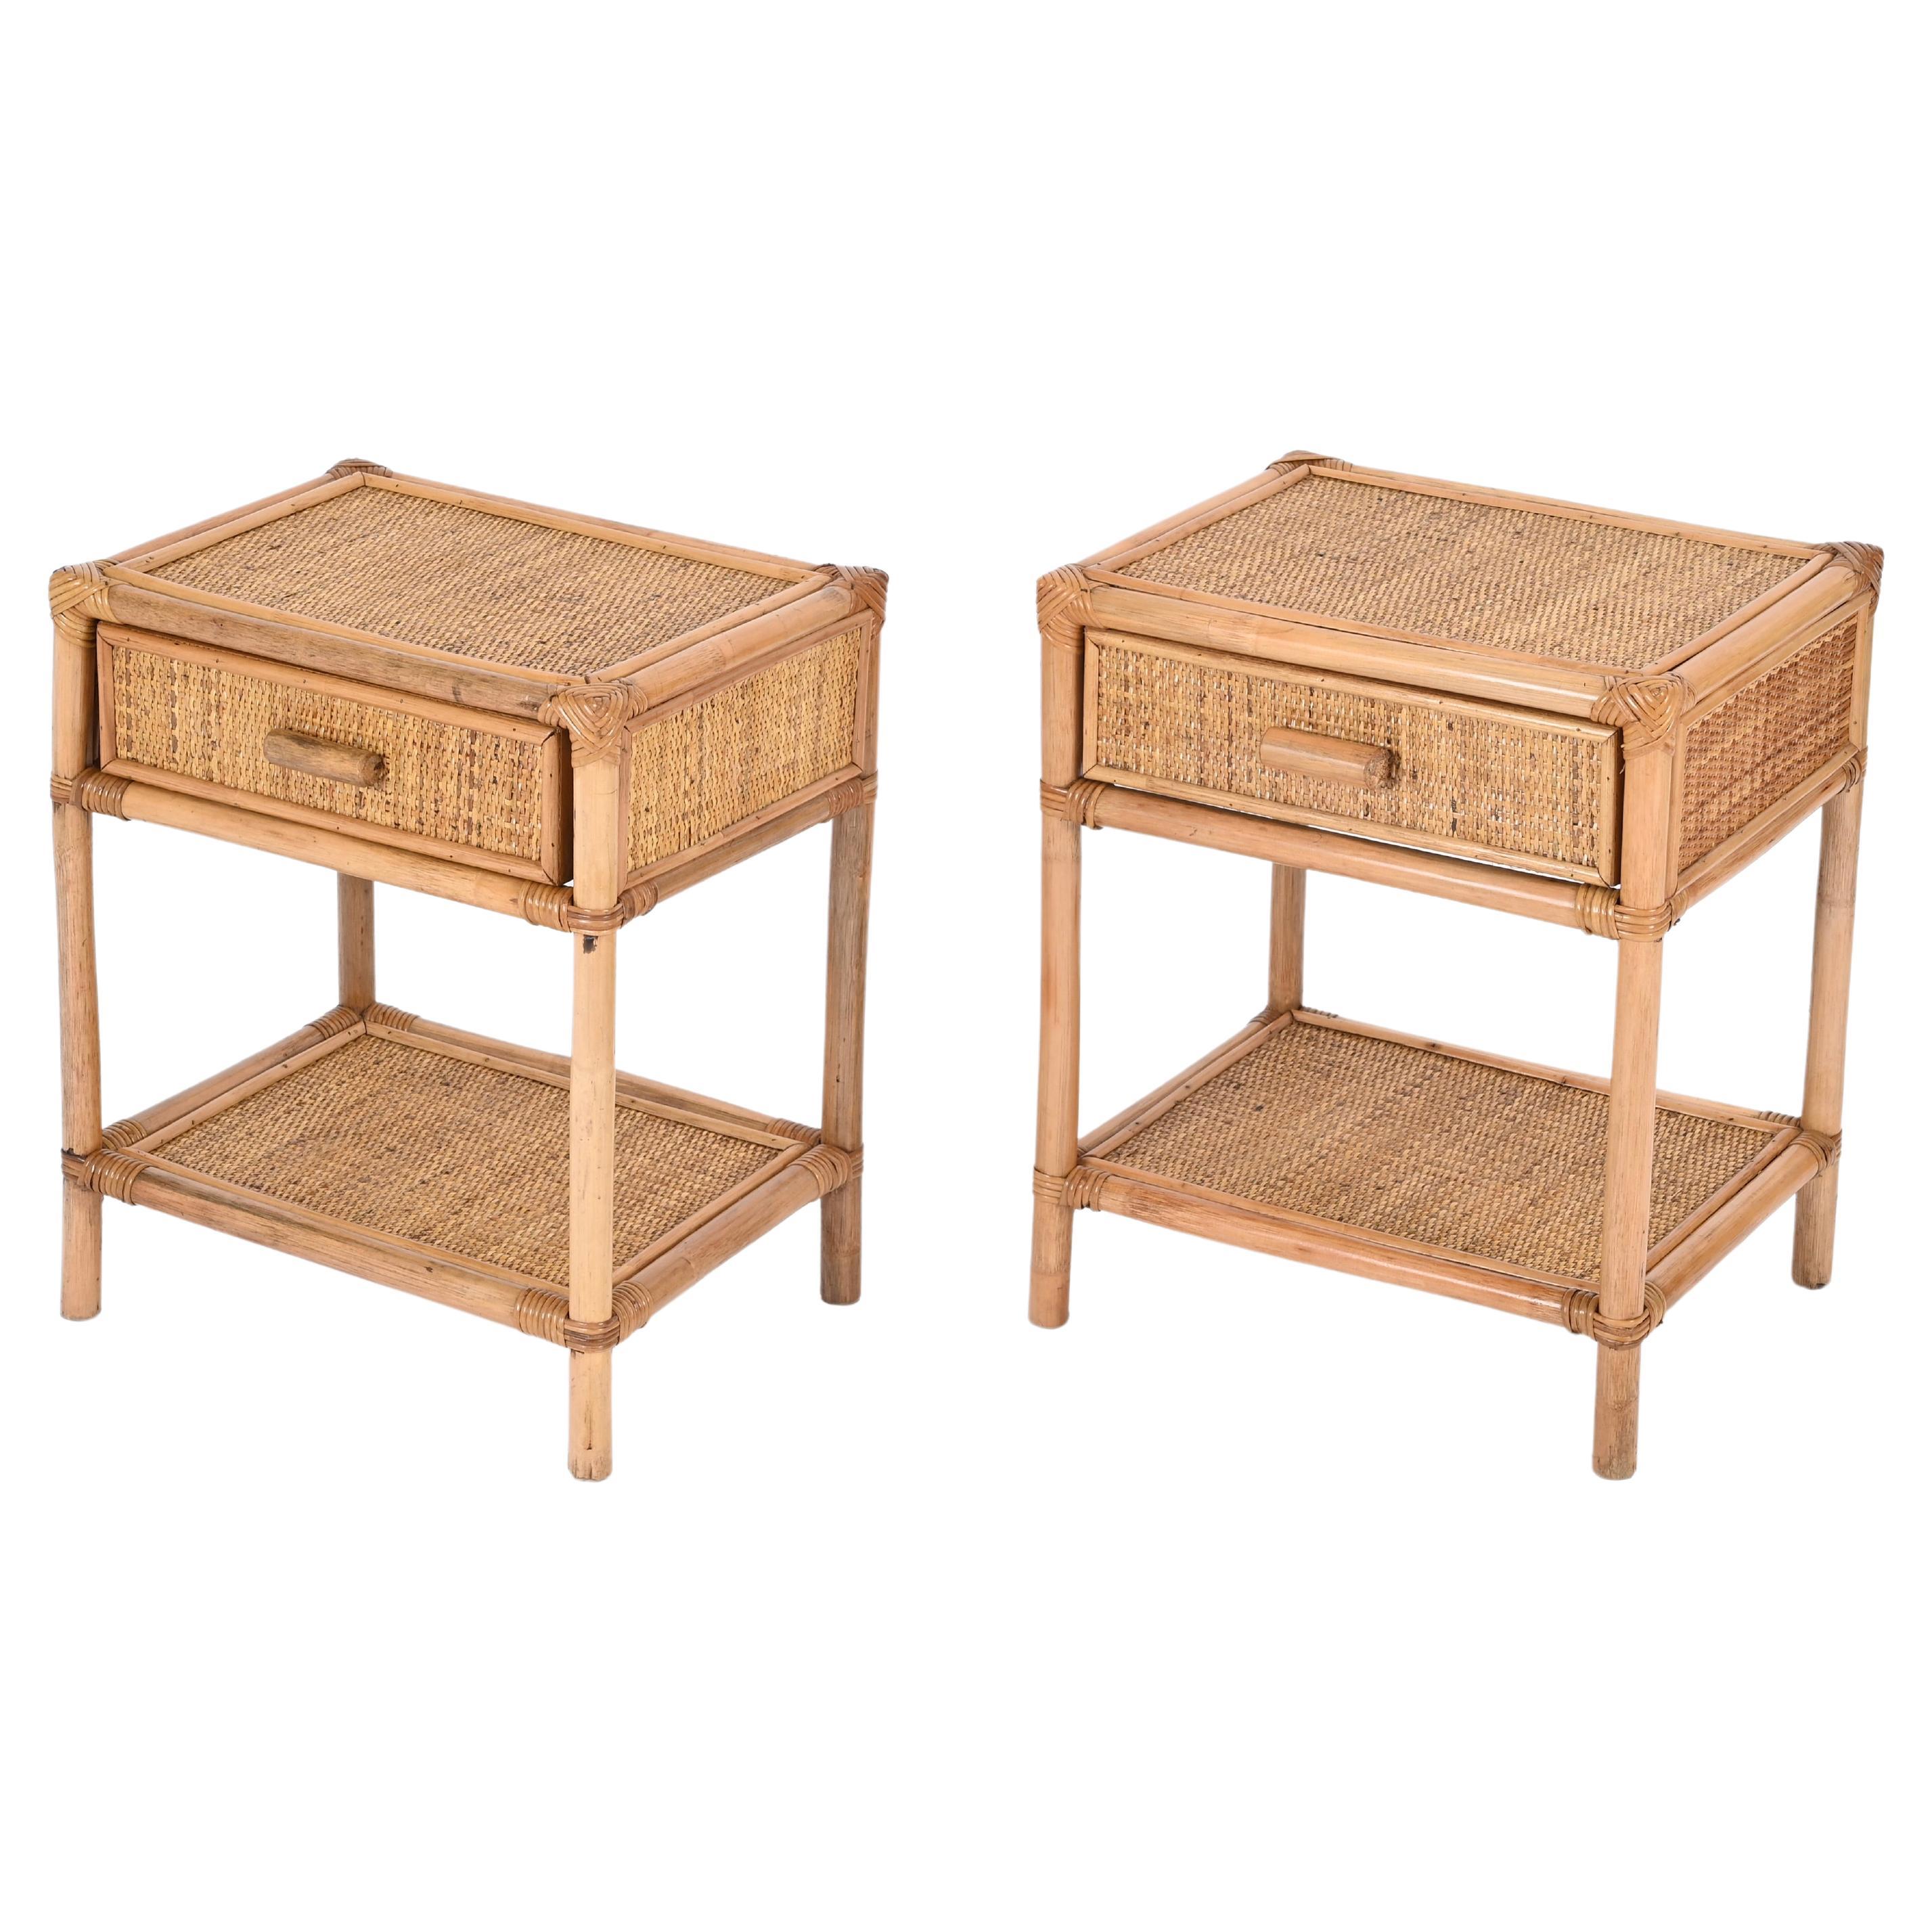 Pair of Mid-Century French Riviera Nightstands in Bamboo and Rattan, Italy 1970s